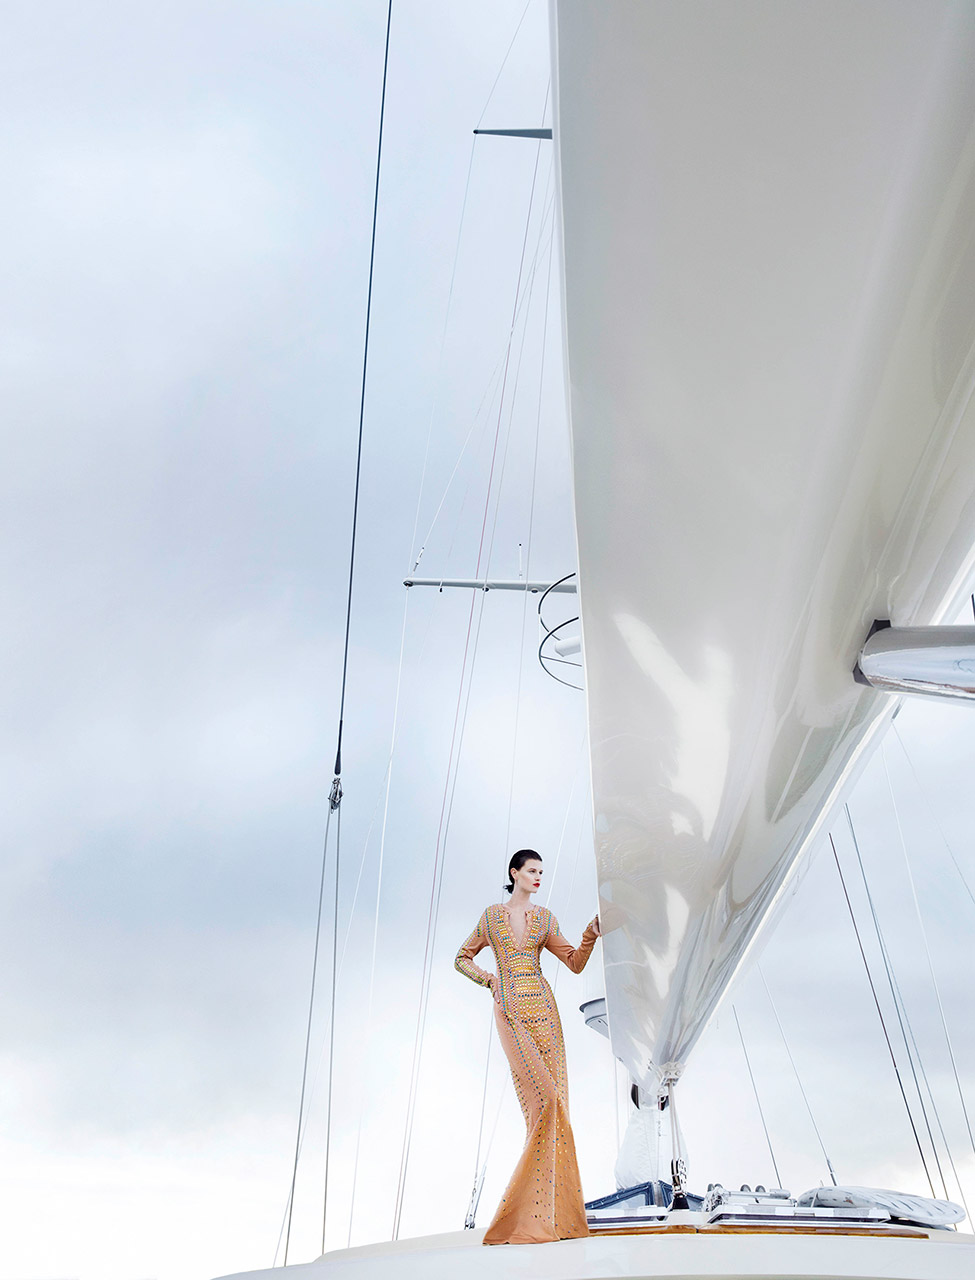 Woman in a long evening gown, standing on a sailboat